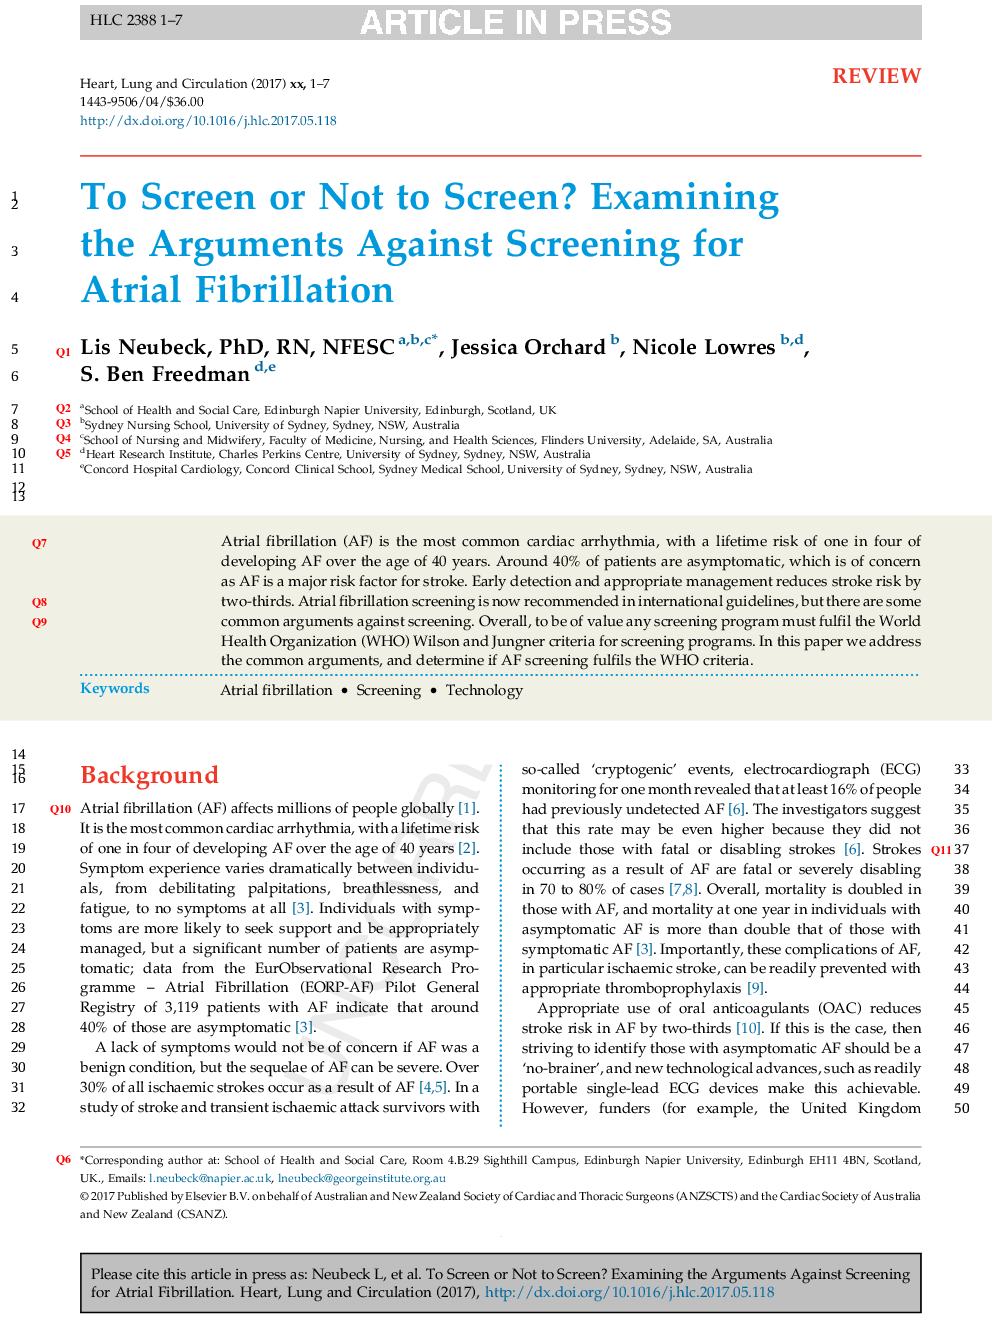 To Screen or Not to Screen? Examining the Arguments Against Screening for Atrial Fibrillation